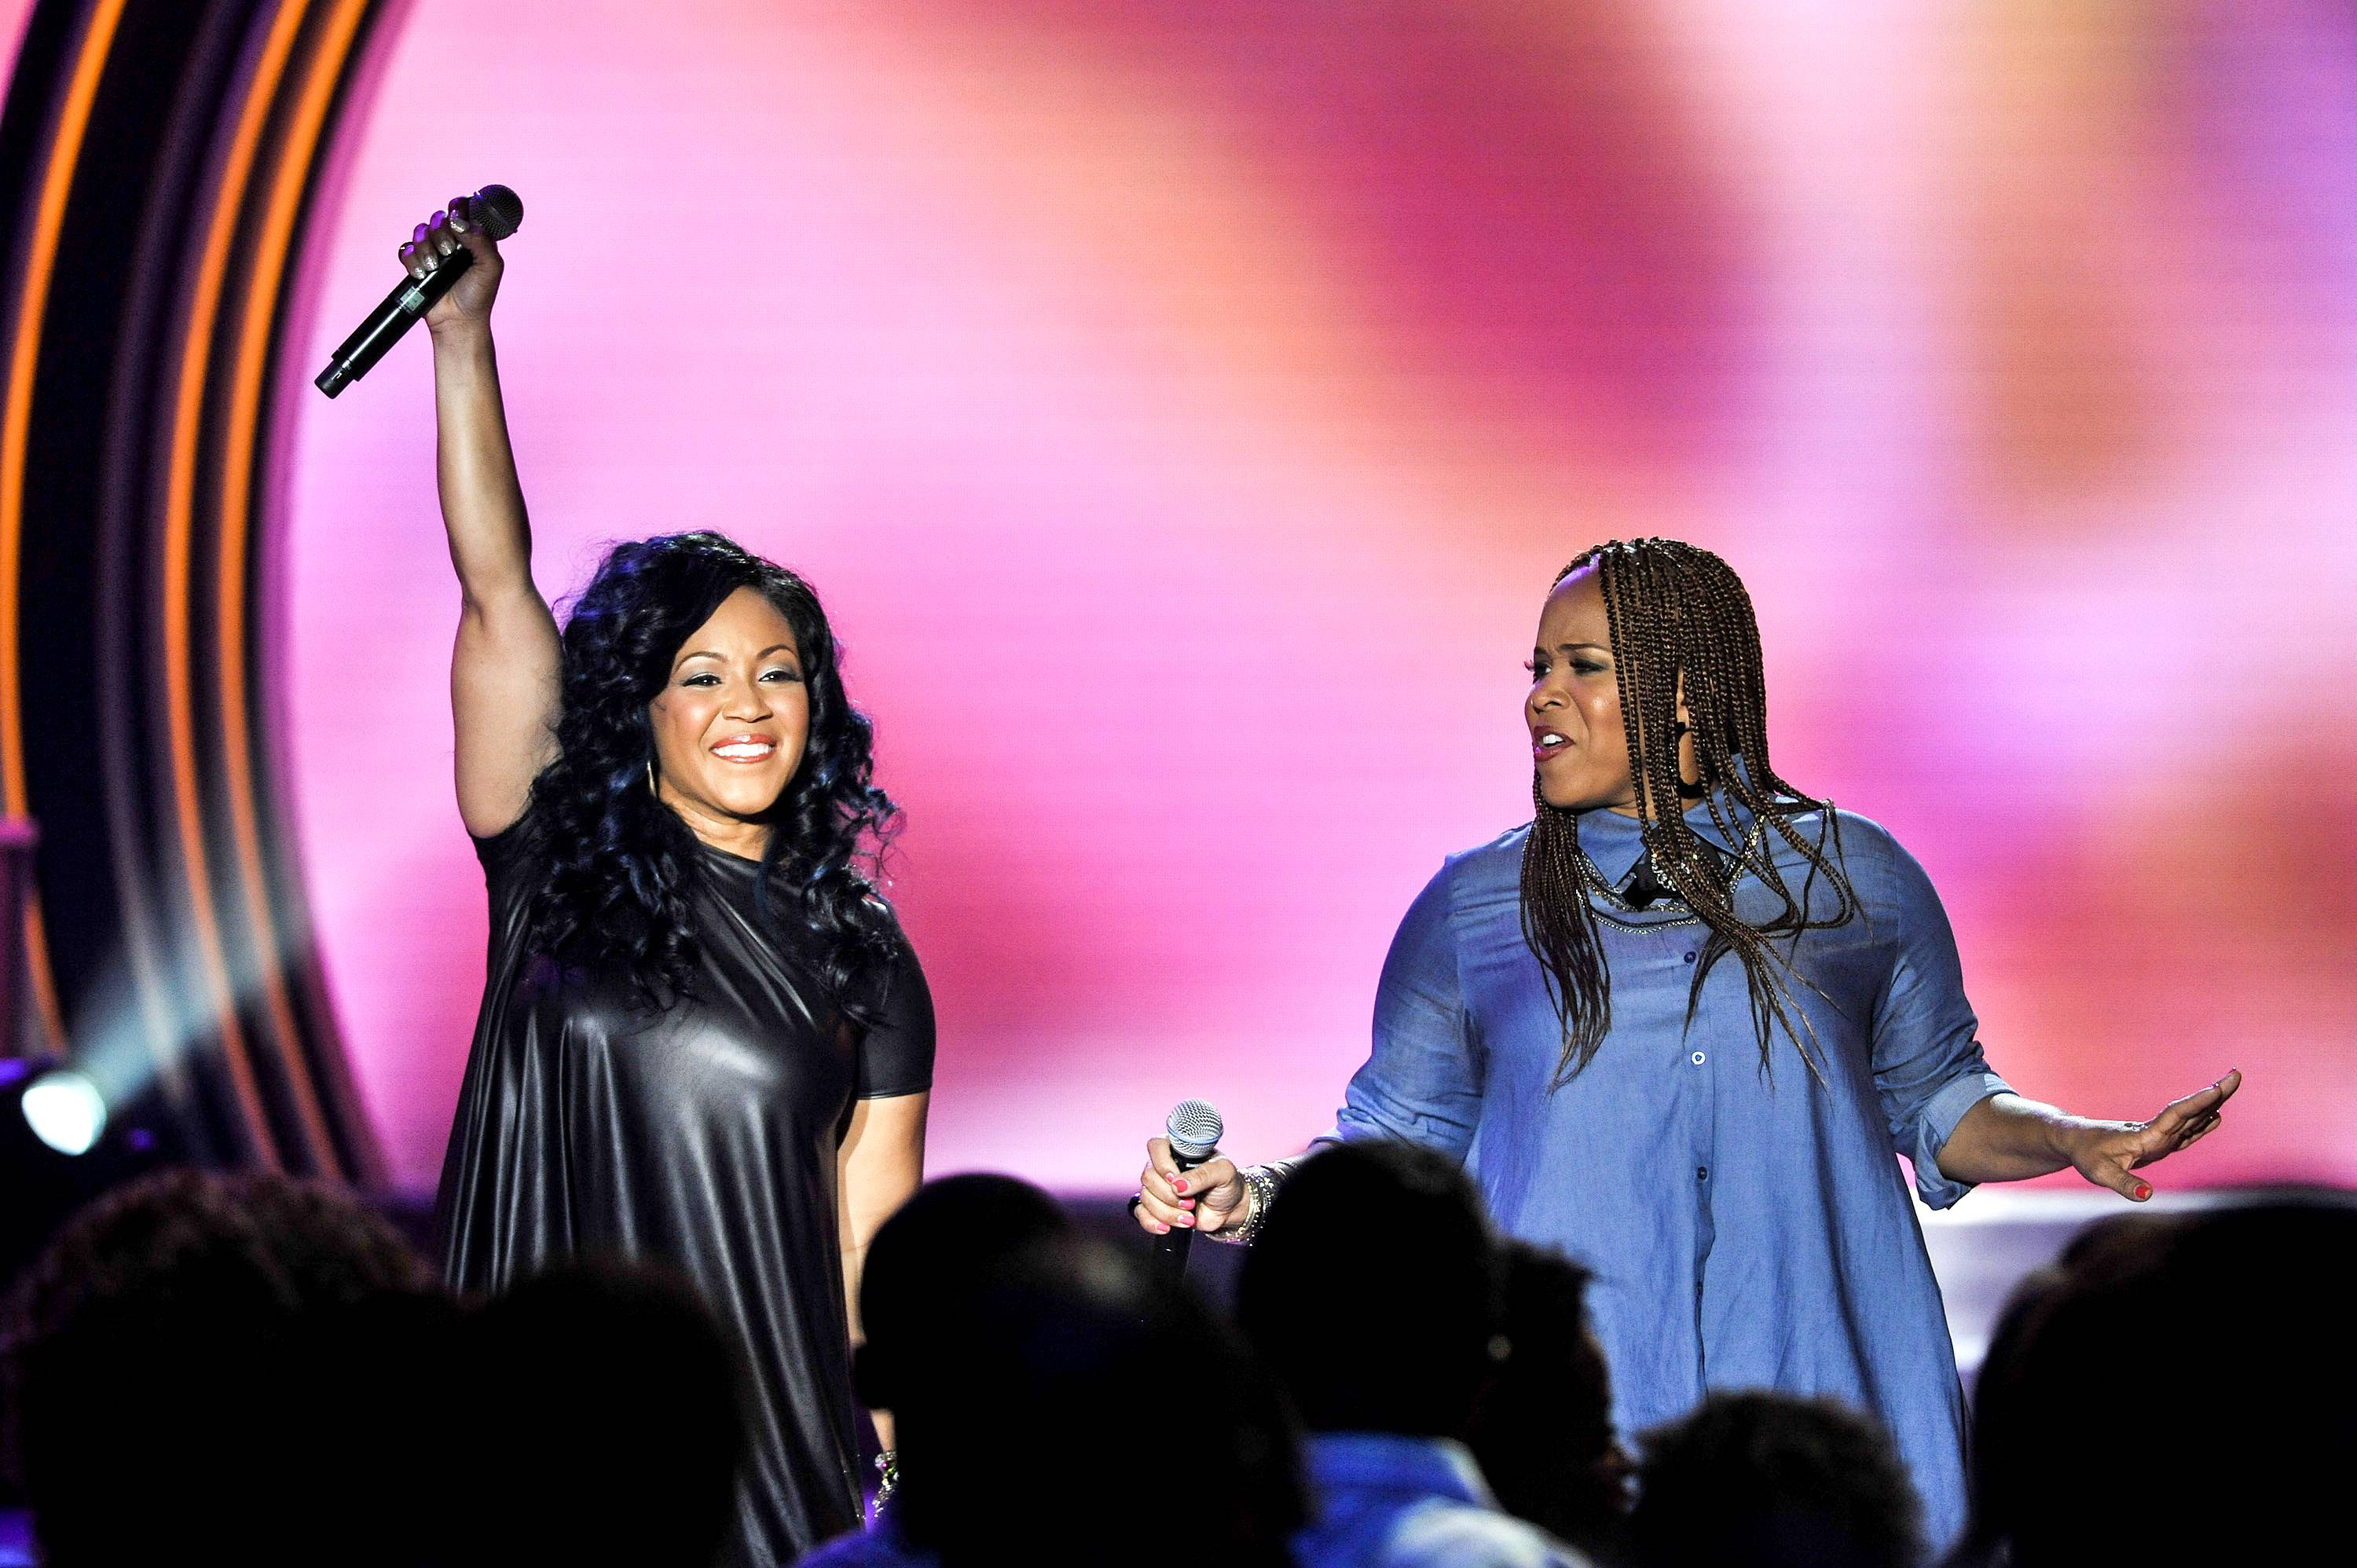 Best Bobby Jones Gospel Moments: Season 35, Episode 6 - Erica Campbell and Tina Campbell of Mary Mary perform, and Dorinda Clark-Cole also performs on the set of Bobby Jones Gospel. (Photo: Kris Connor/Getty Images for BET Networks)